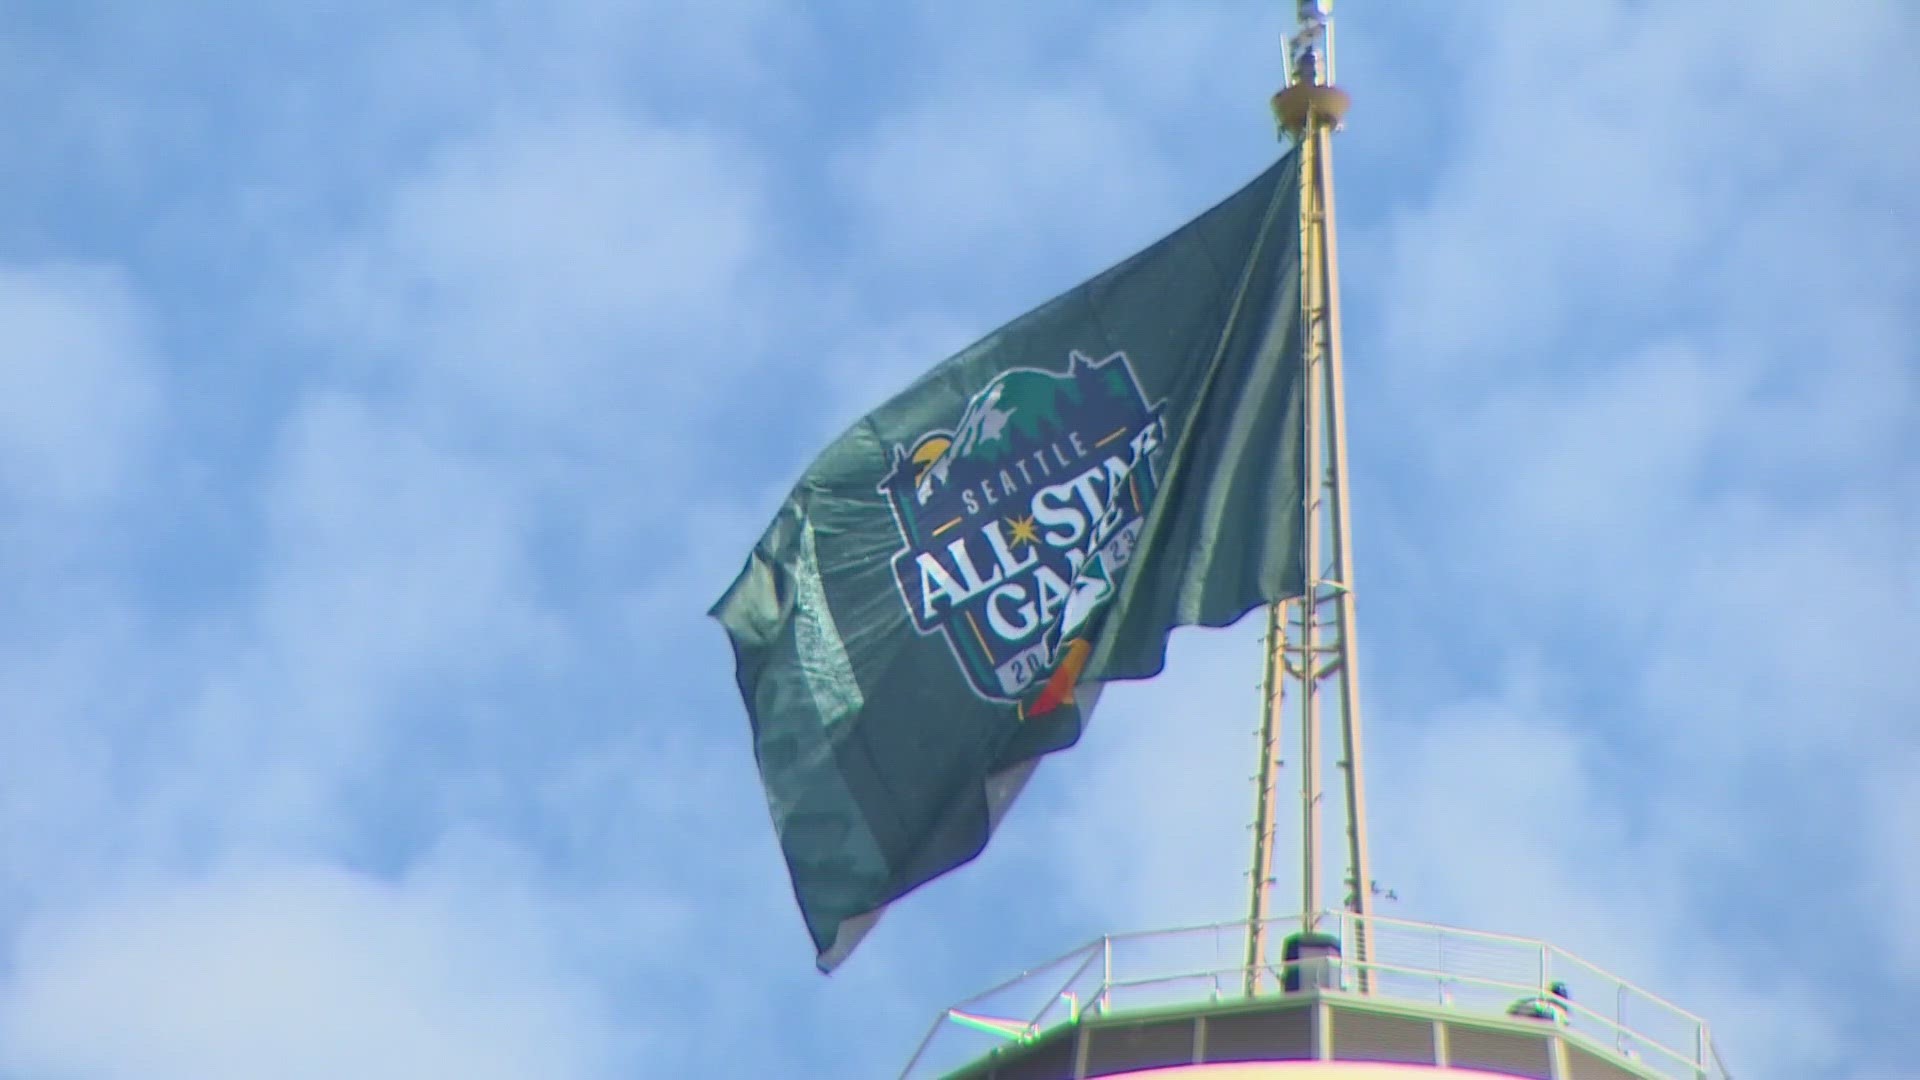 After a difficult few years for downtown Seattle, visitors in town for the All-Star Experience said they would like to keep coming back.